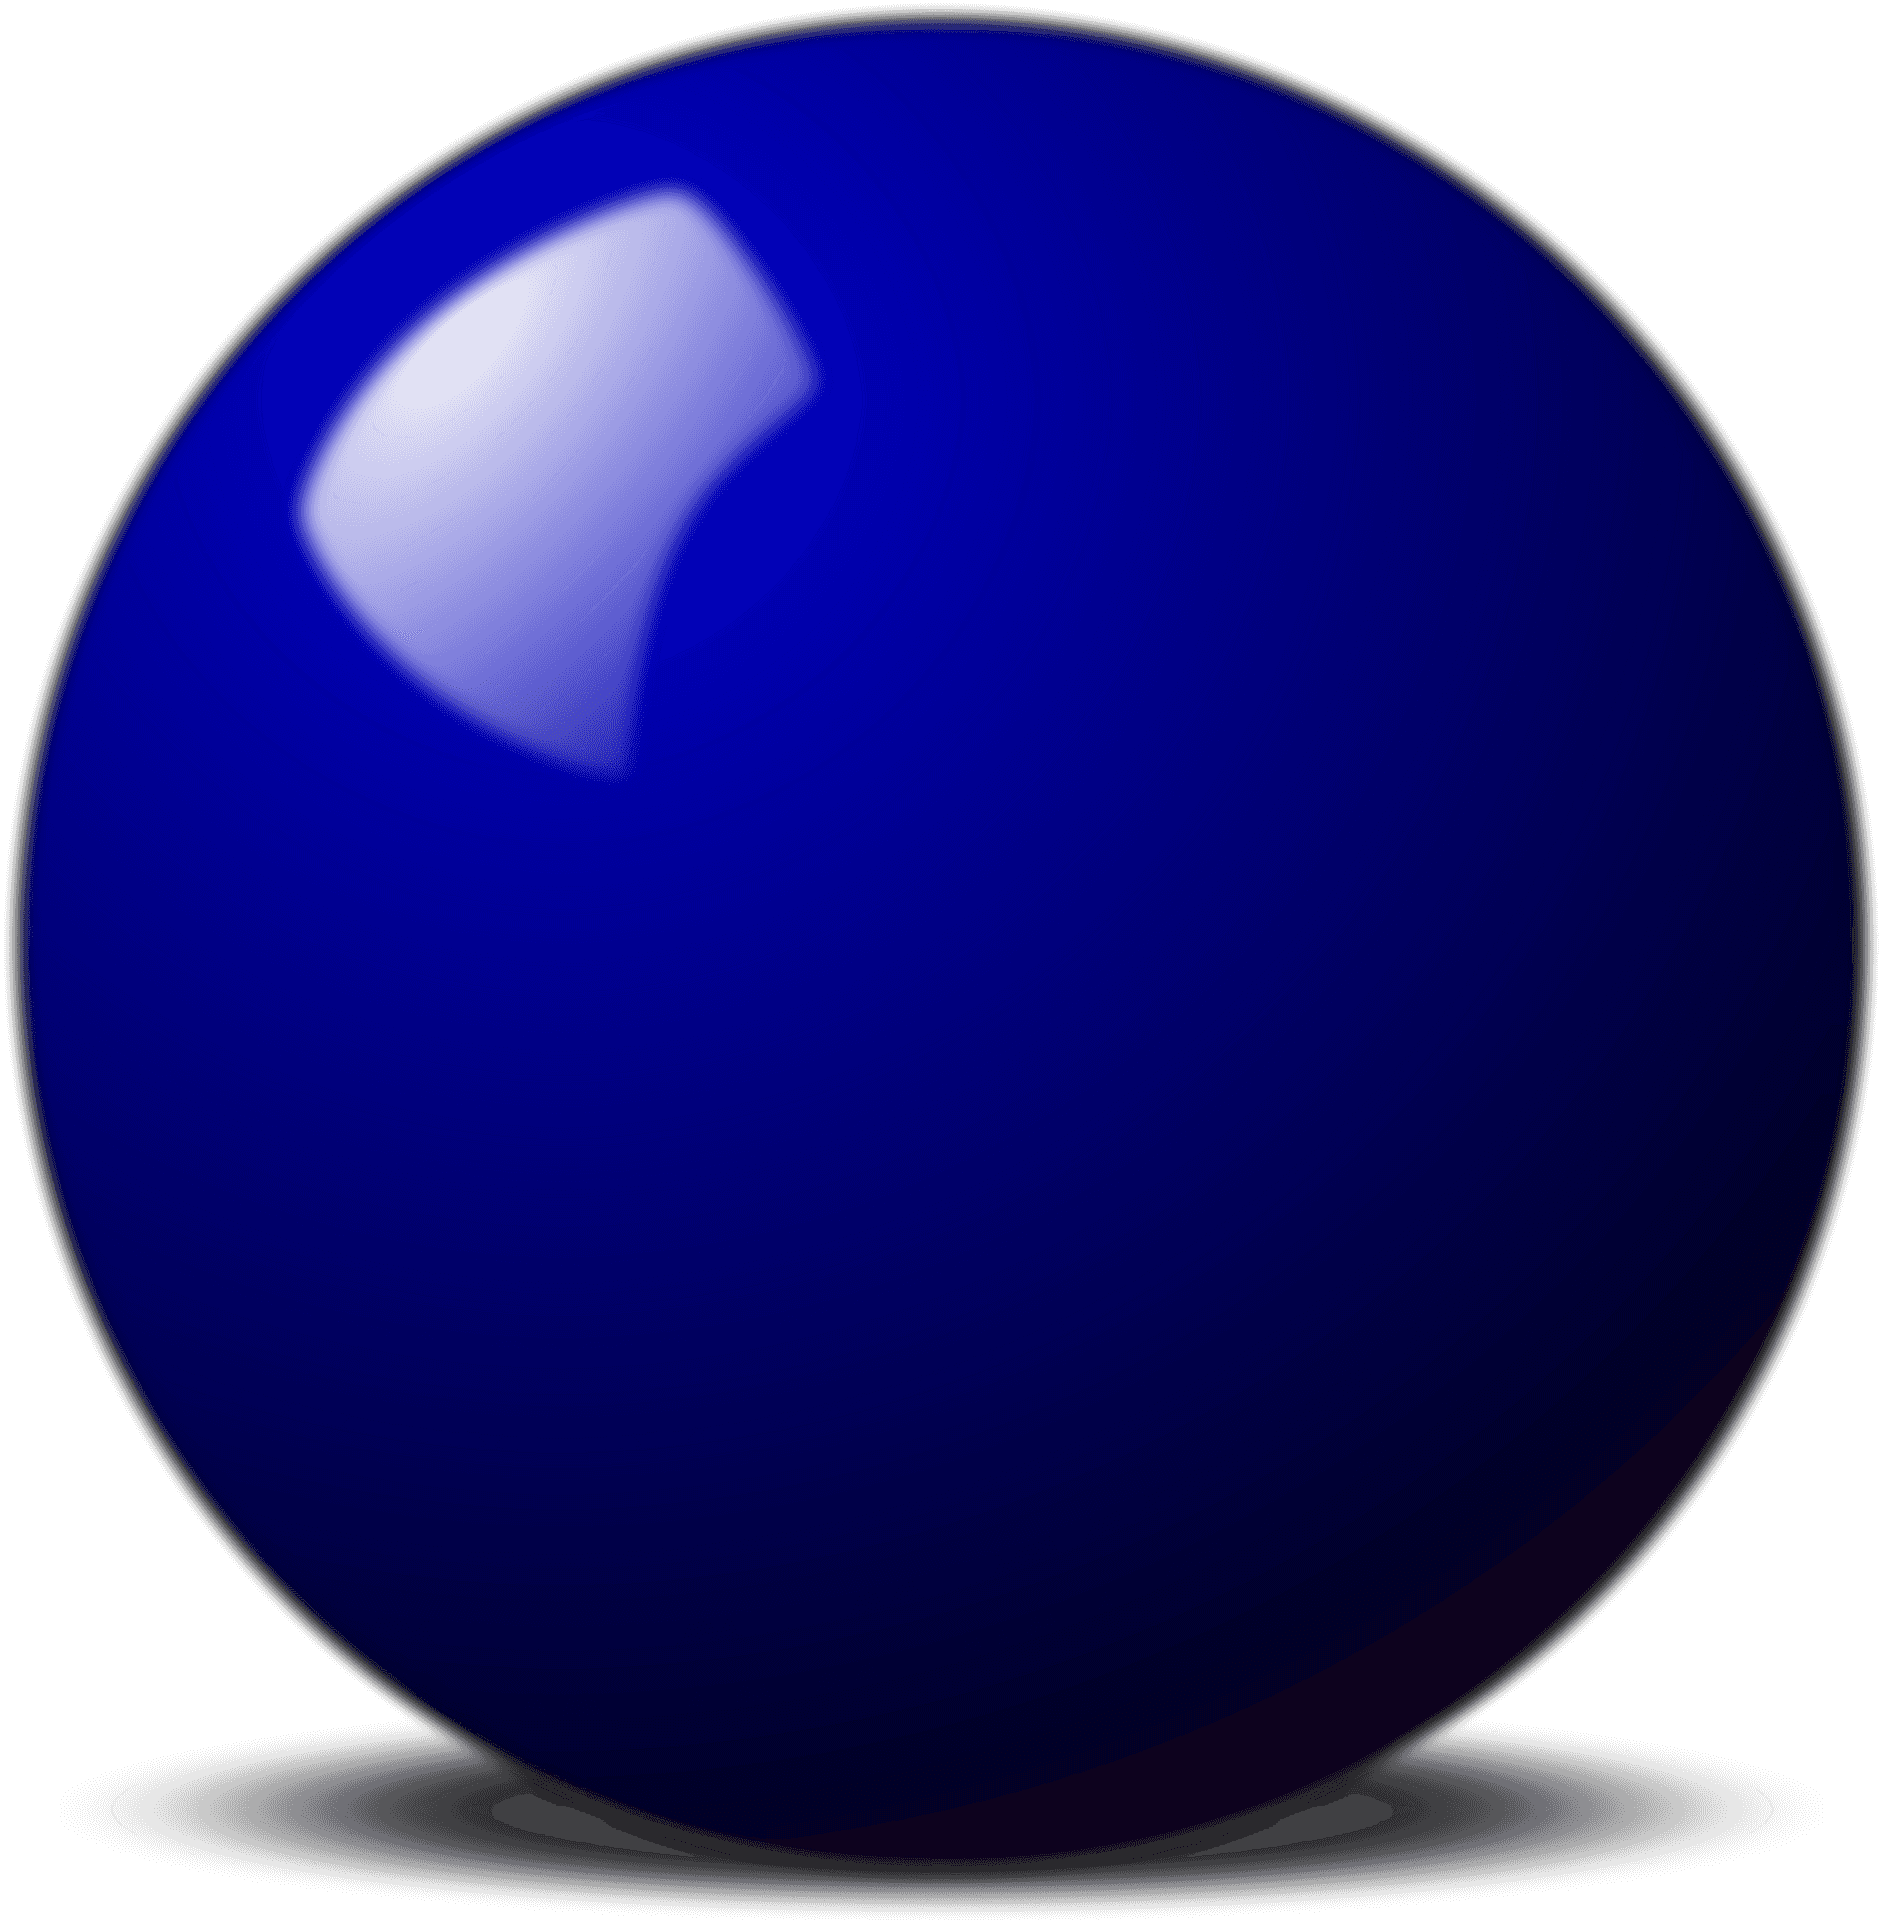 Blue Snooker Ball Graphic PNG image